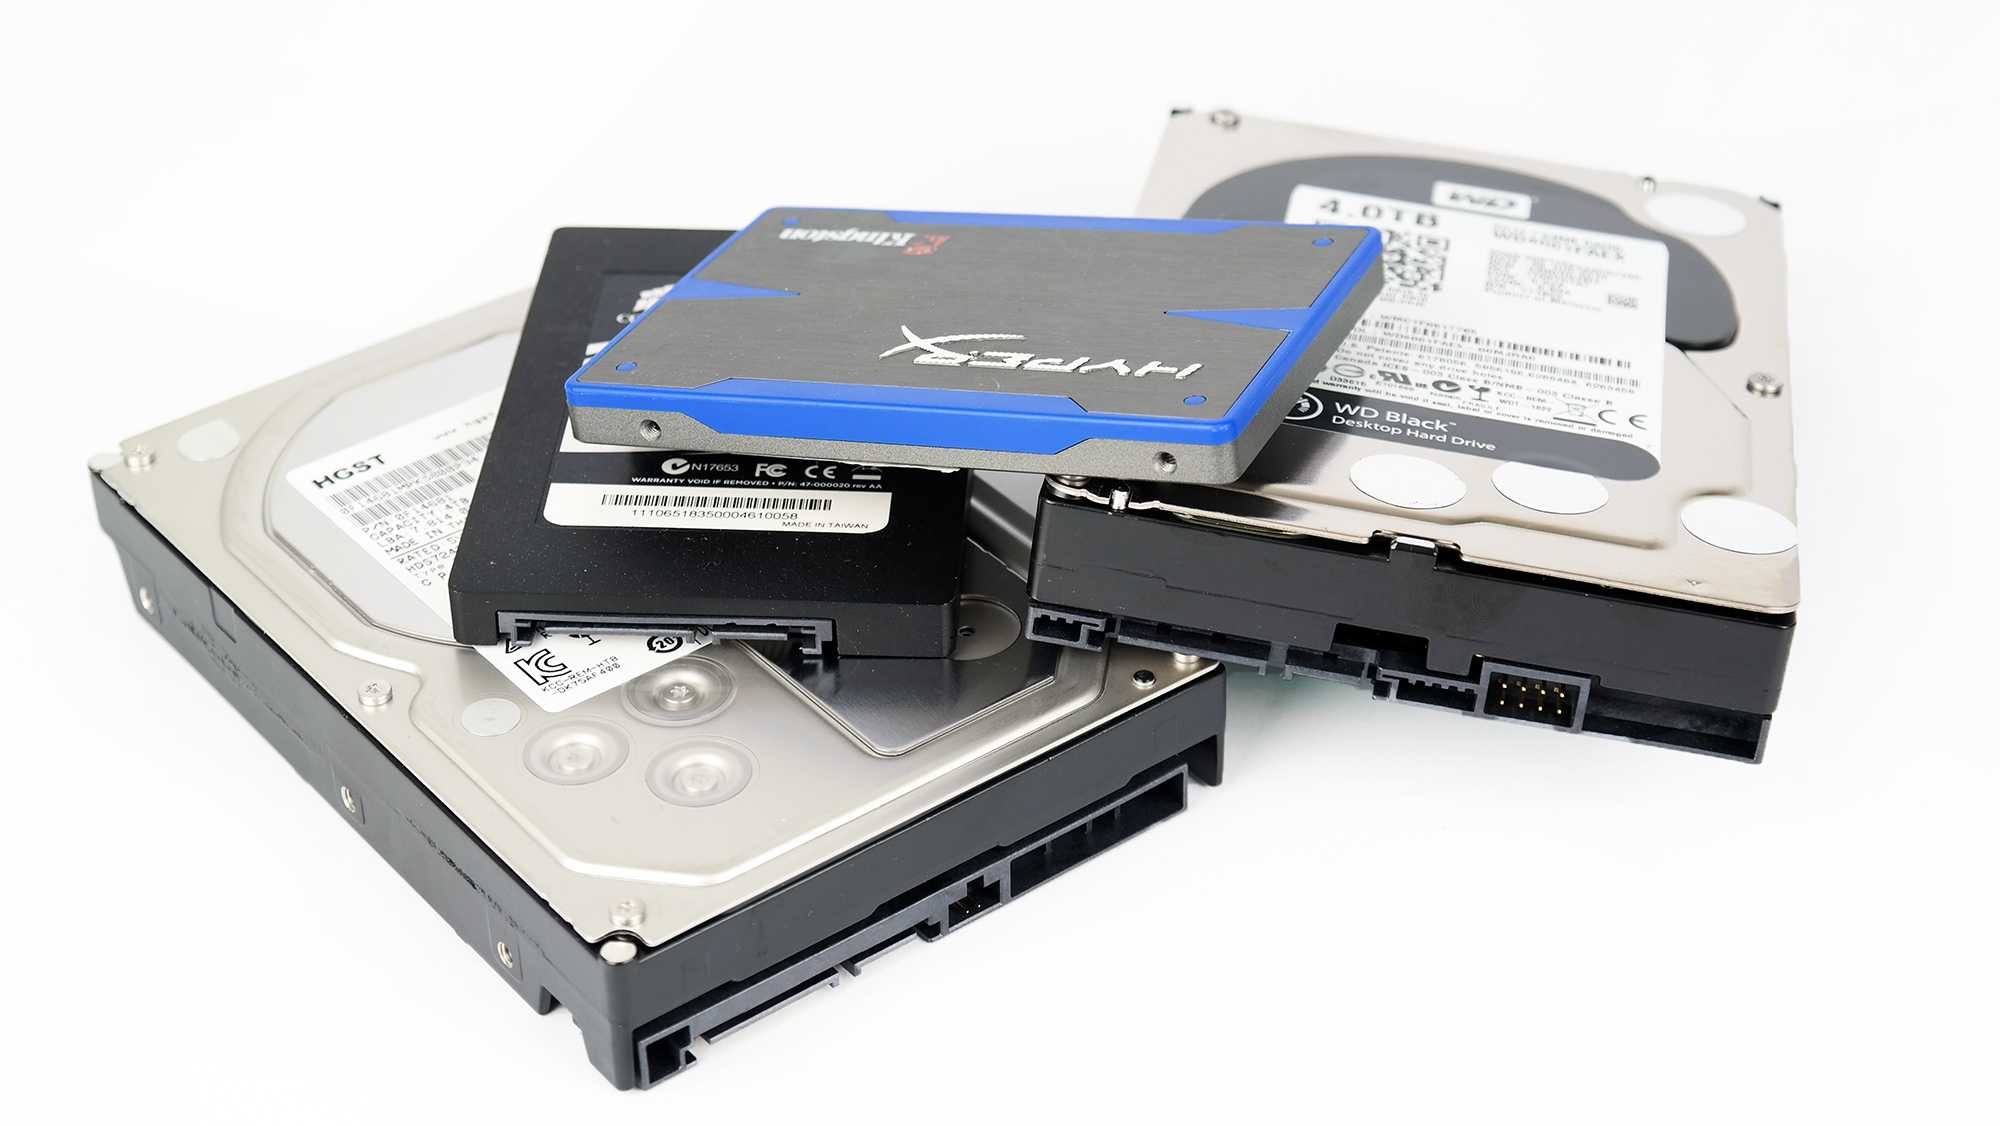 Ssd or hdd for steam фото 39